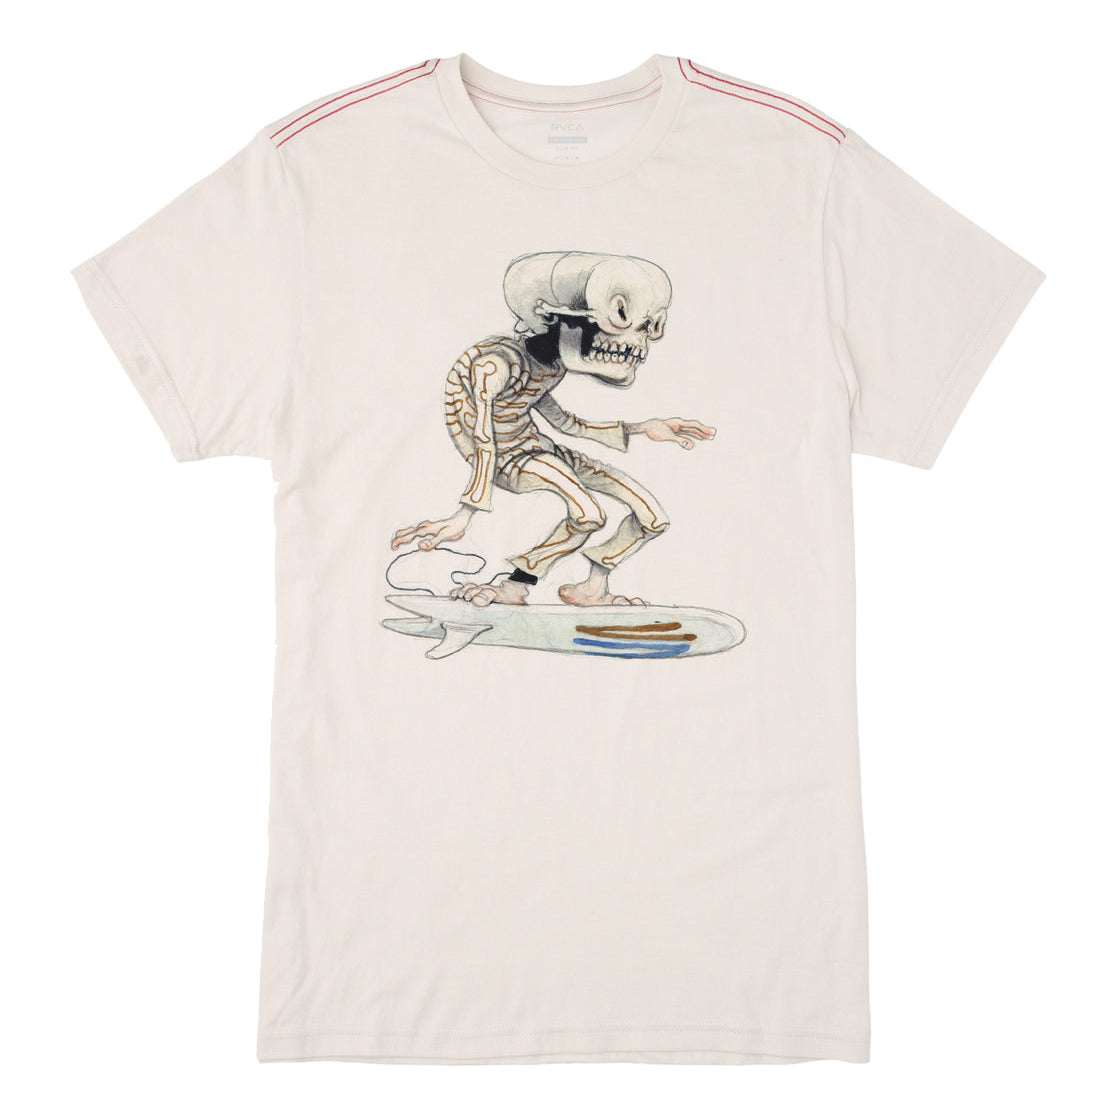 RVCA Skull Surfer Tee ANW-AntiqueWhite S